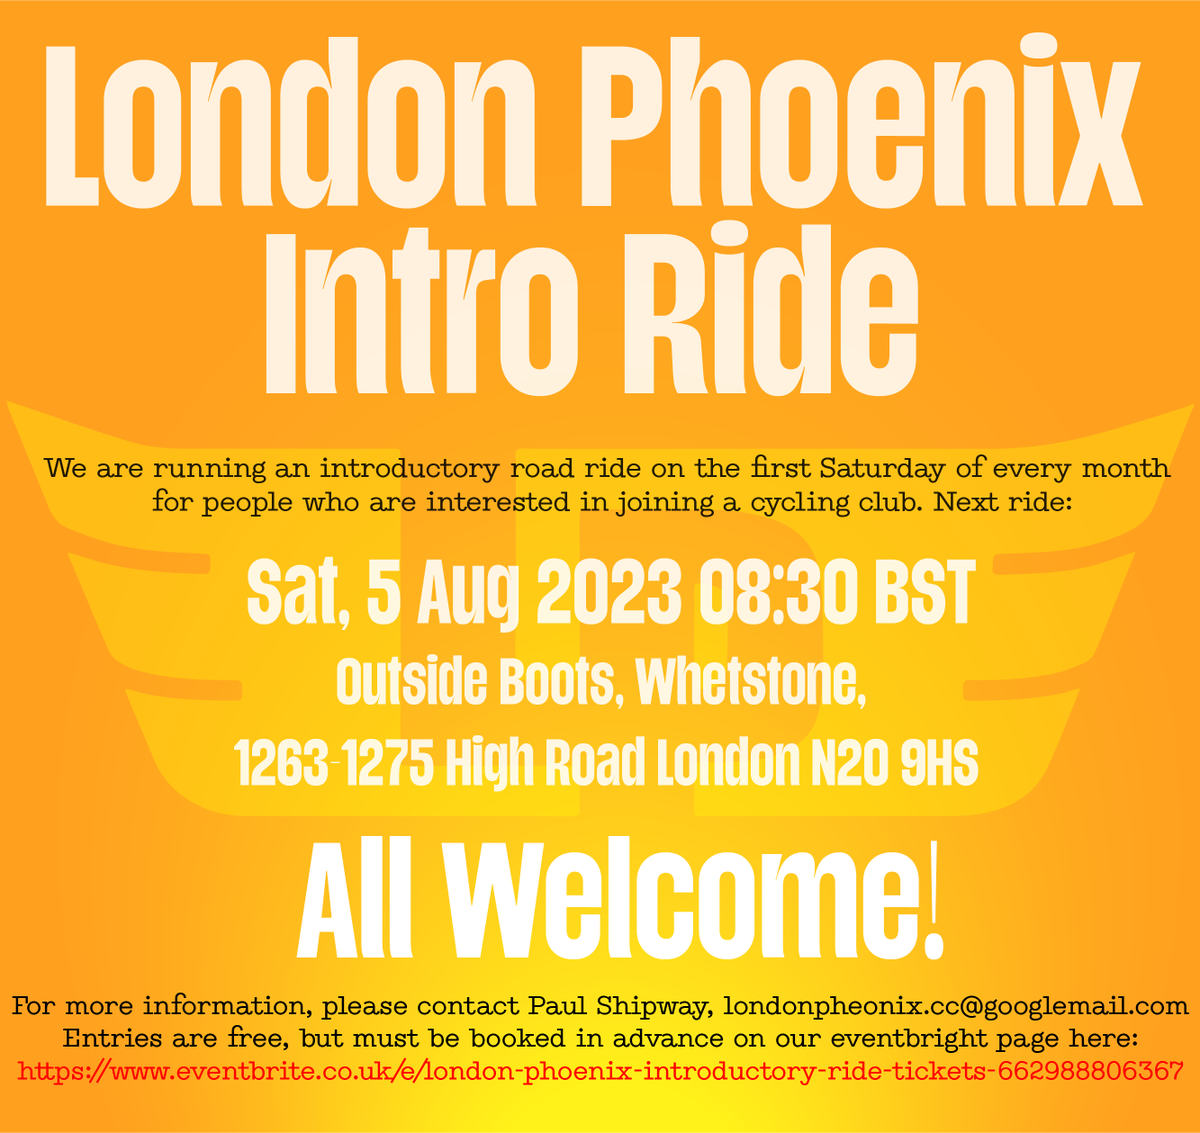 Introductory road ride for people who are interested in joining a cycling club. Next ride: Saturday, 5 Aug 2023 08:30 BST. All welcome! Meet outside Boots, Whetstone, 1263-1275 High Road London N20 9HS For more information, contact Paul Shipway, londonpheonix.cc@googlemail.com